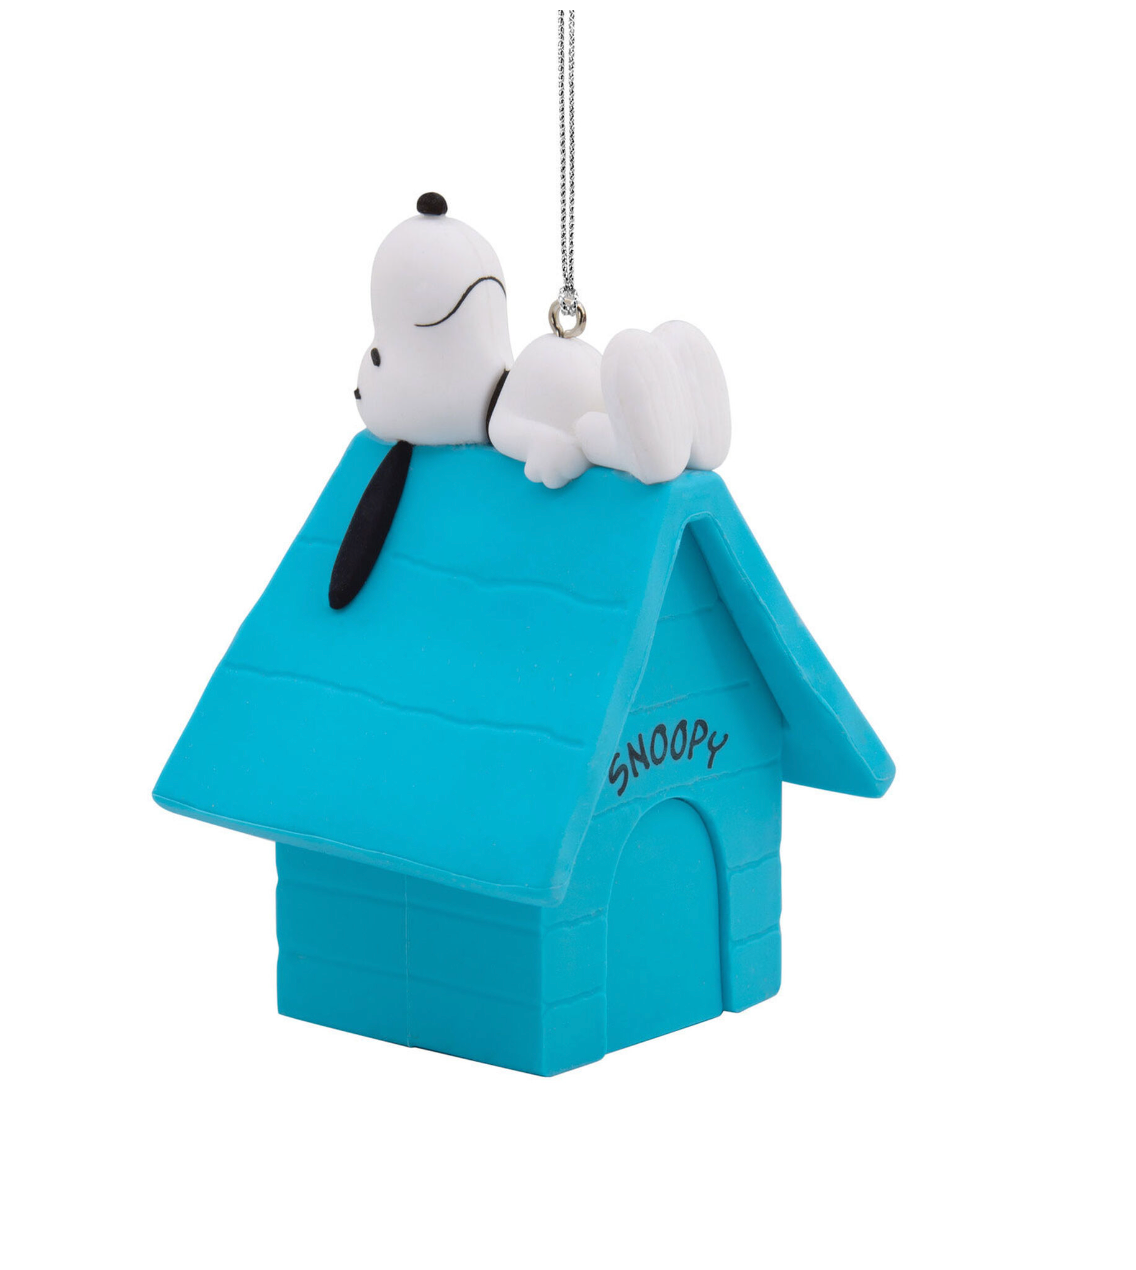 Hallmark Peanuts Snoopy on Blue Doghouse Christmas Tree Ornament New with Tag